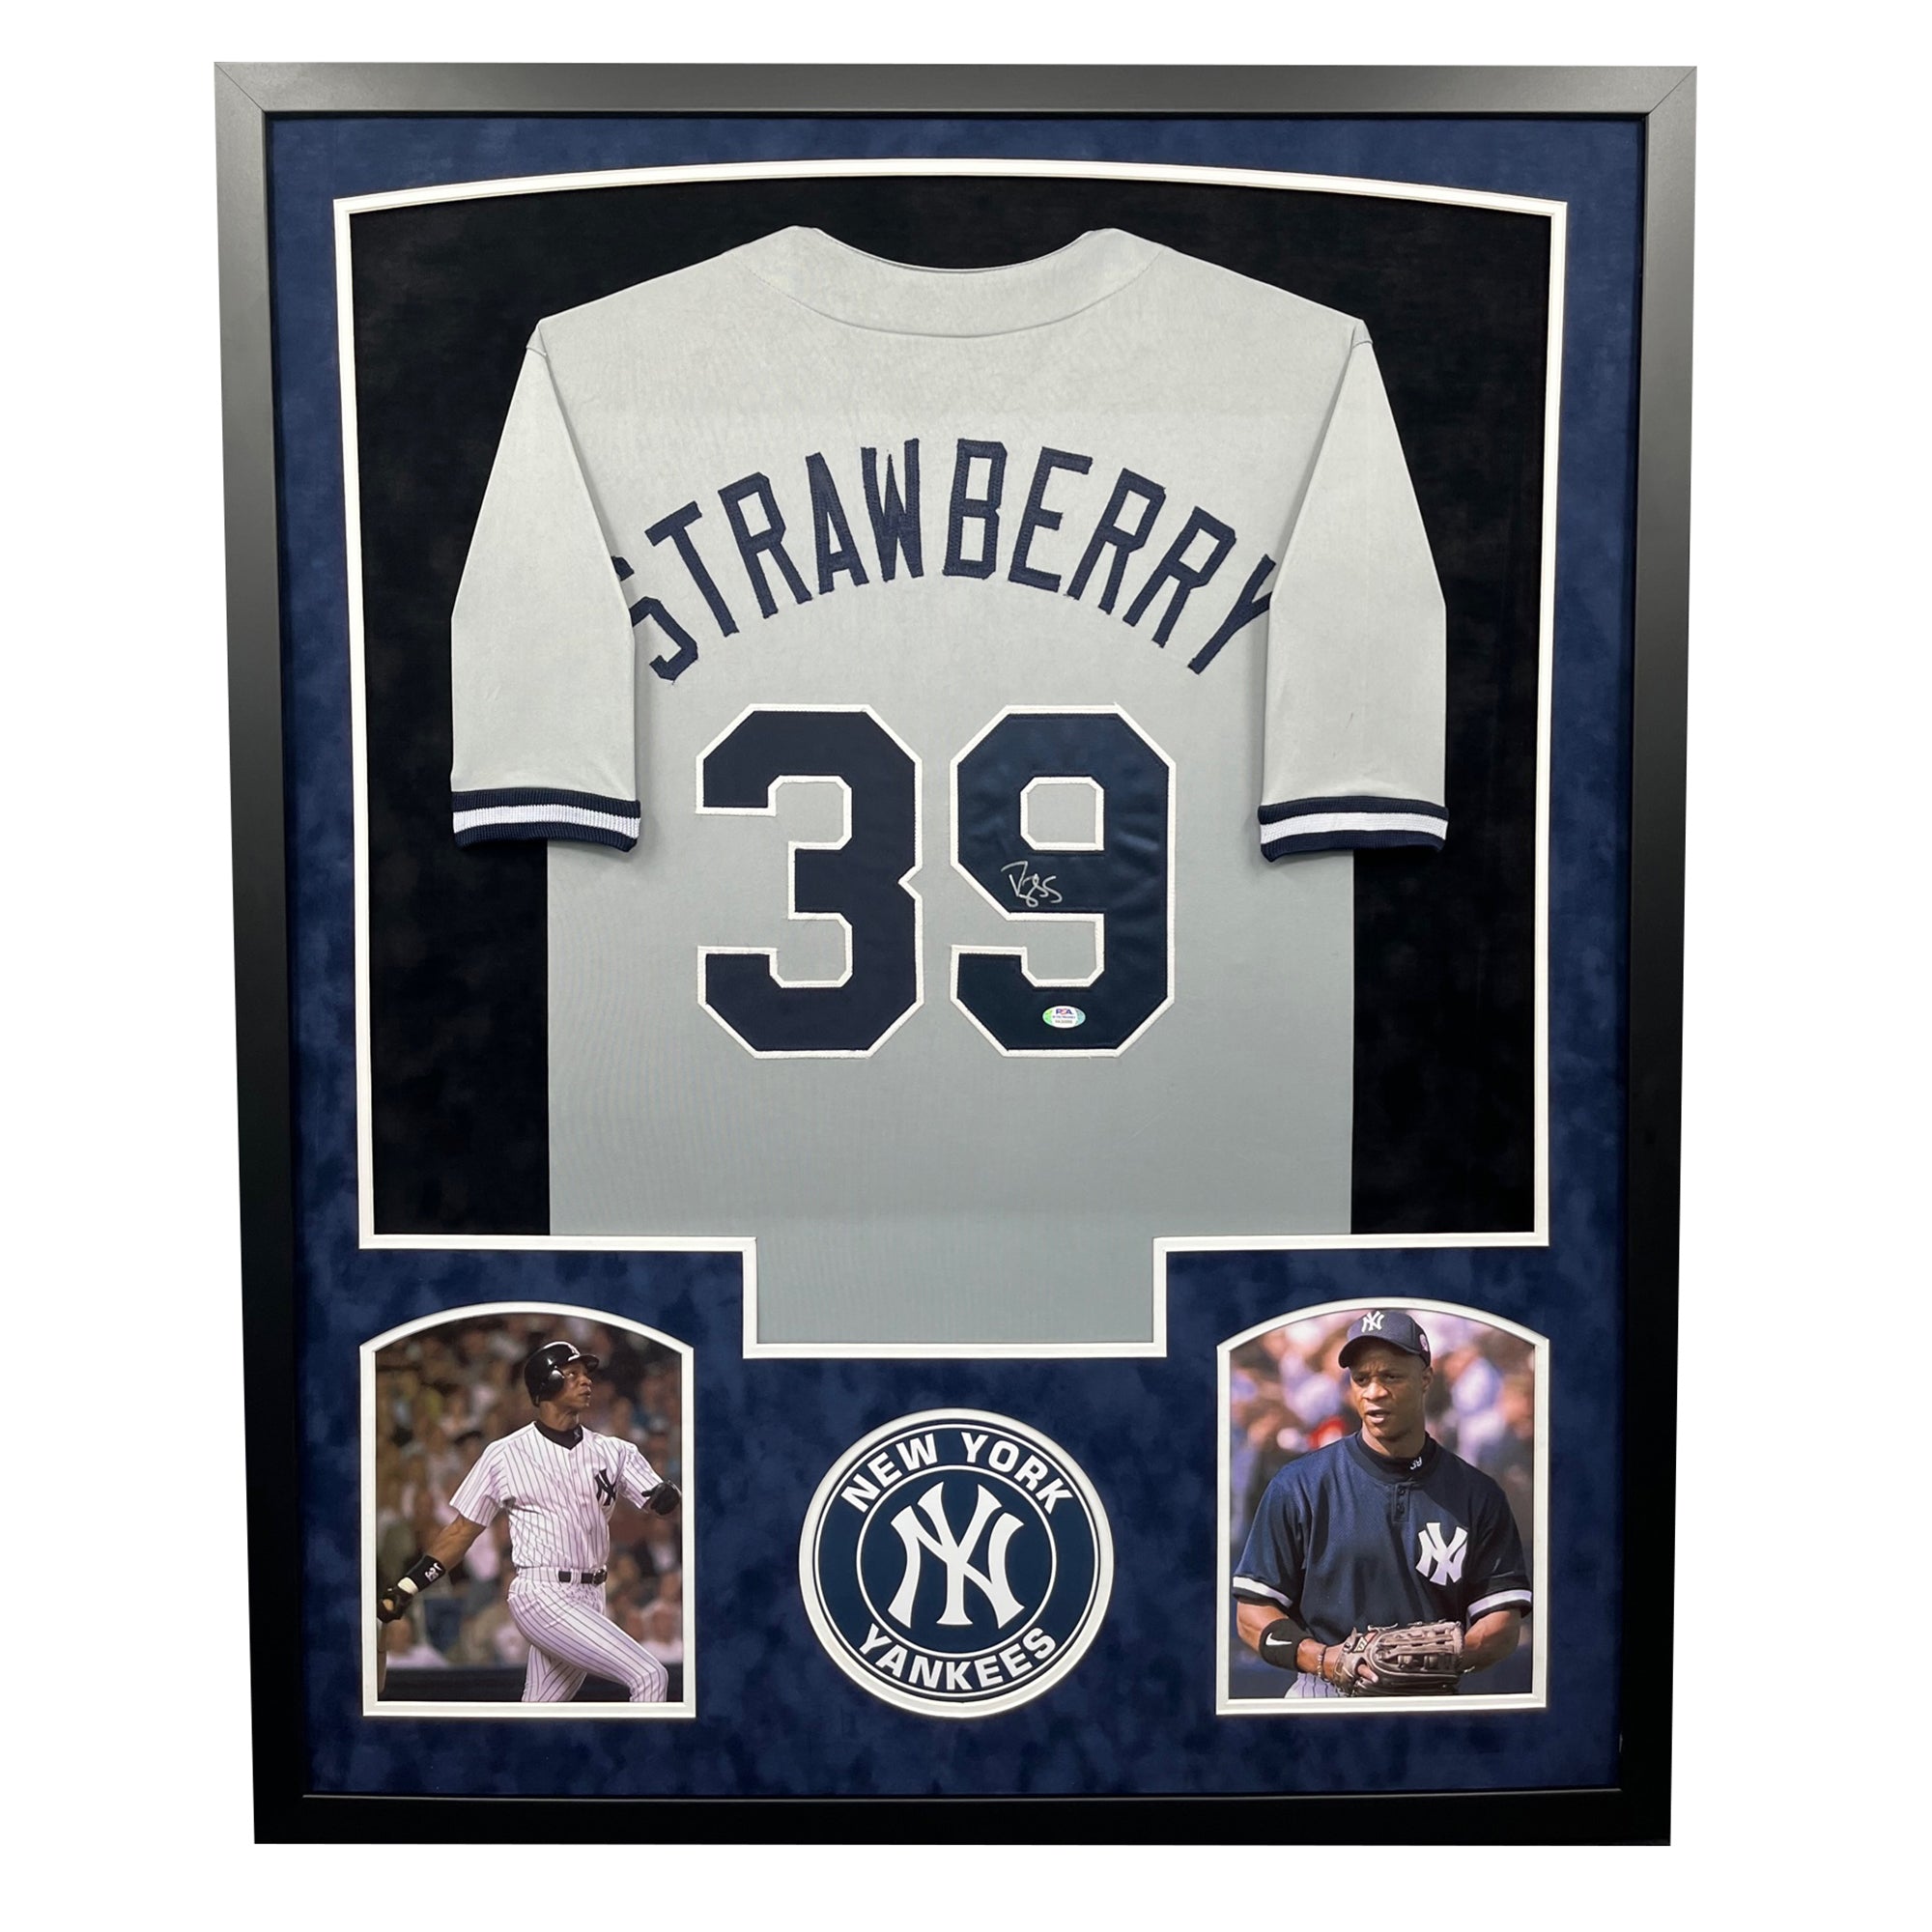 AARON JUDGE AUTOGRAPHED HAND SIGNED CUSTOM FRAMED NEW YORK YANKEES JERSEY